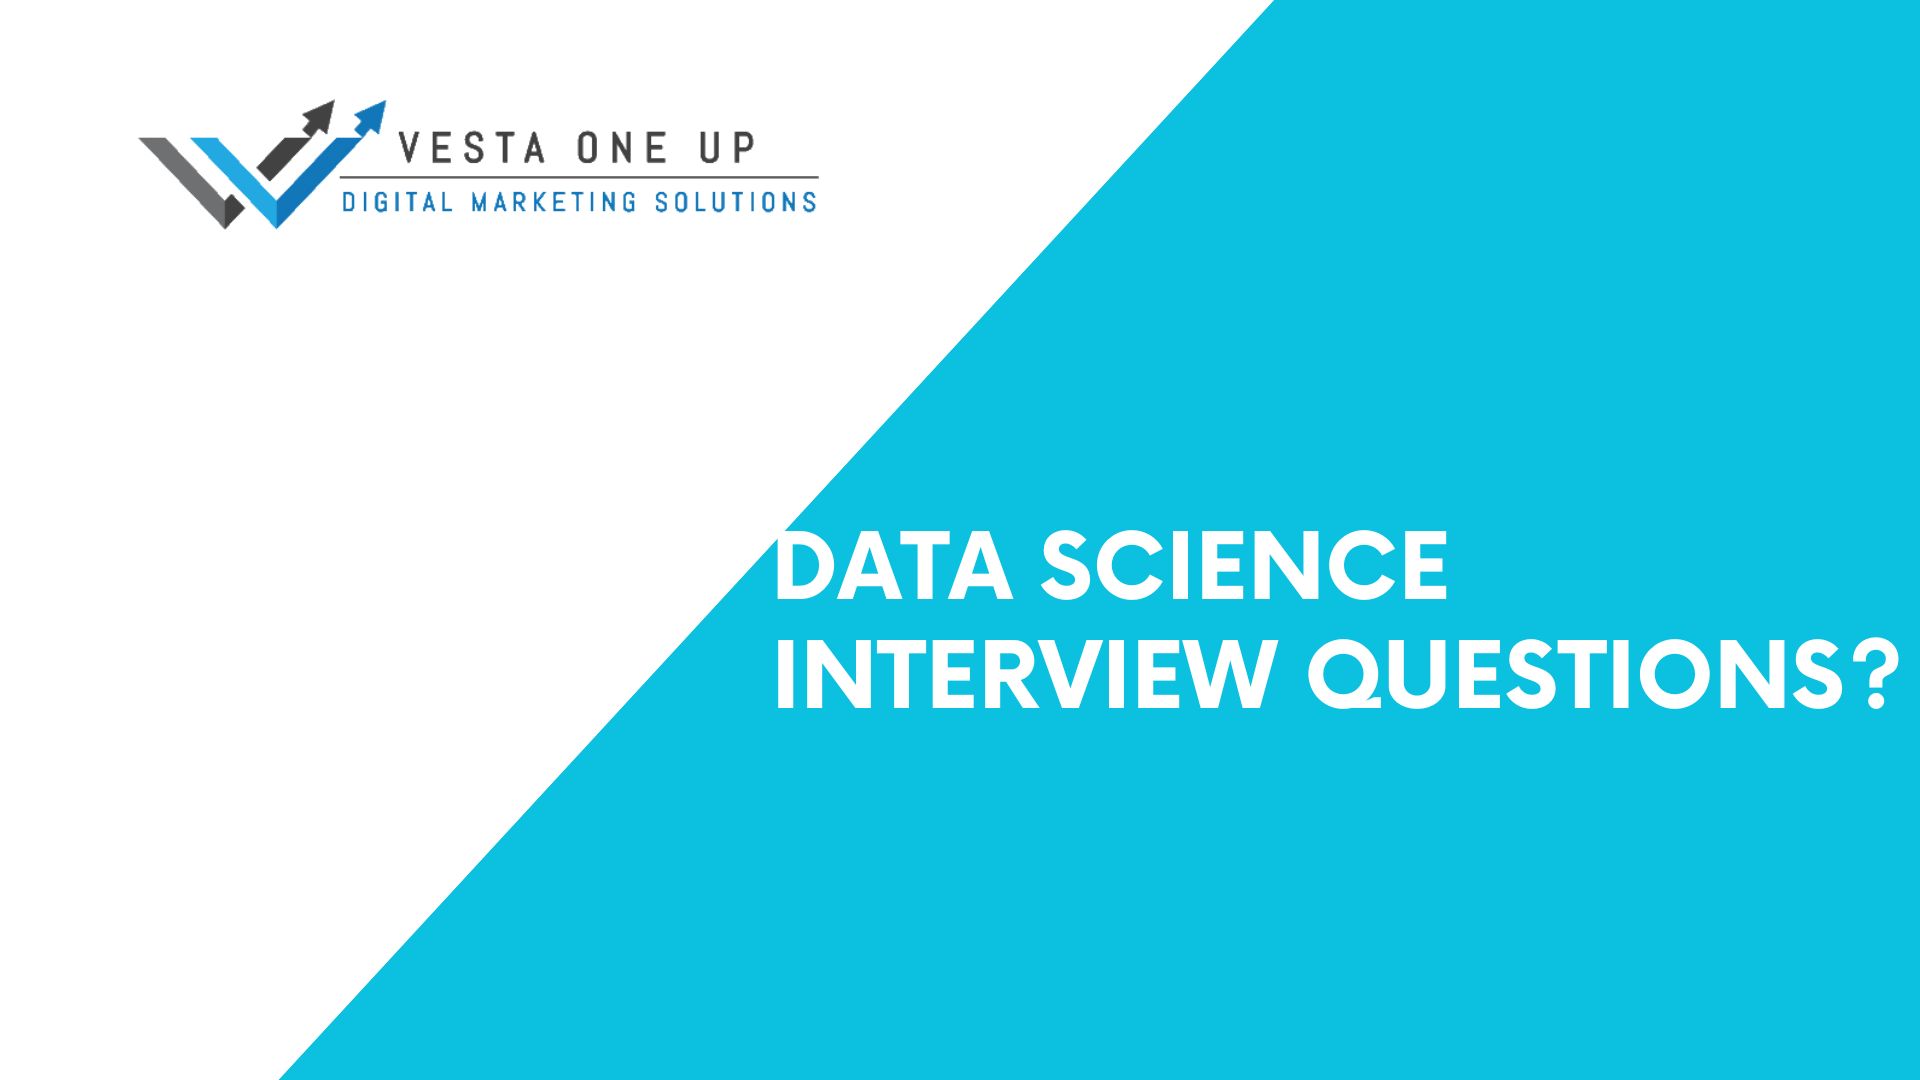 Data science interview questions?